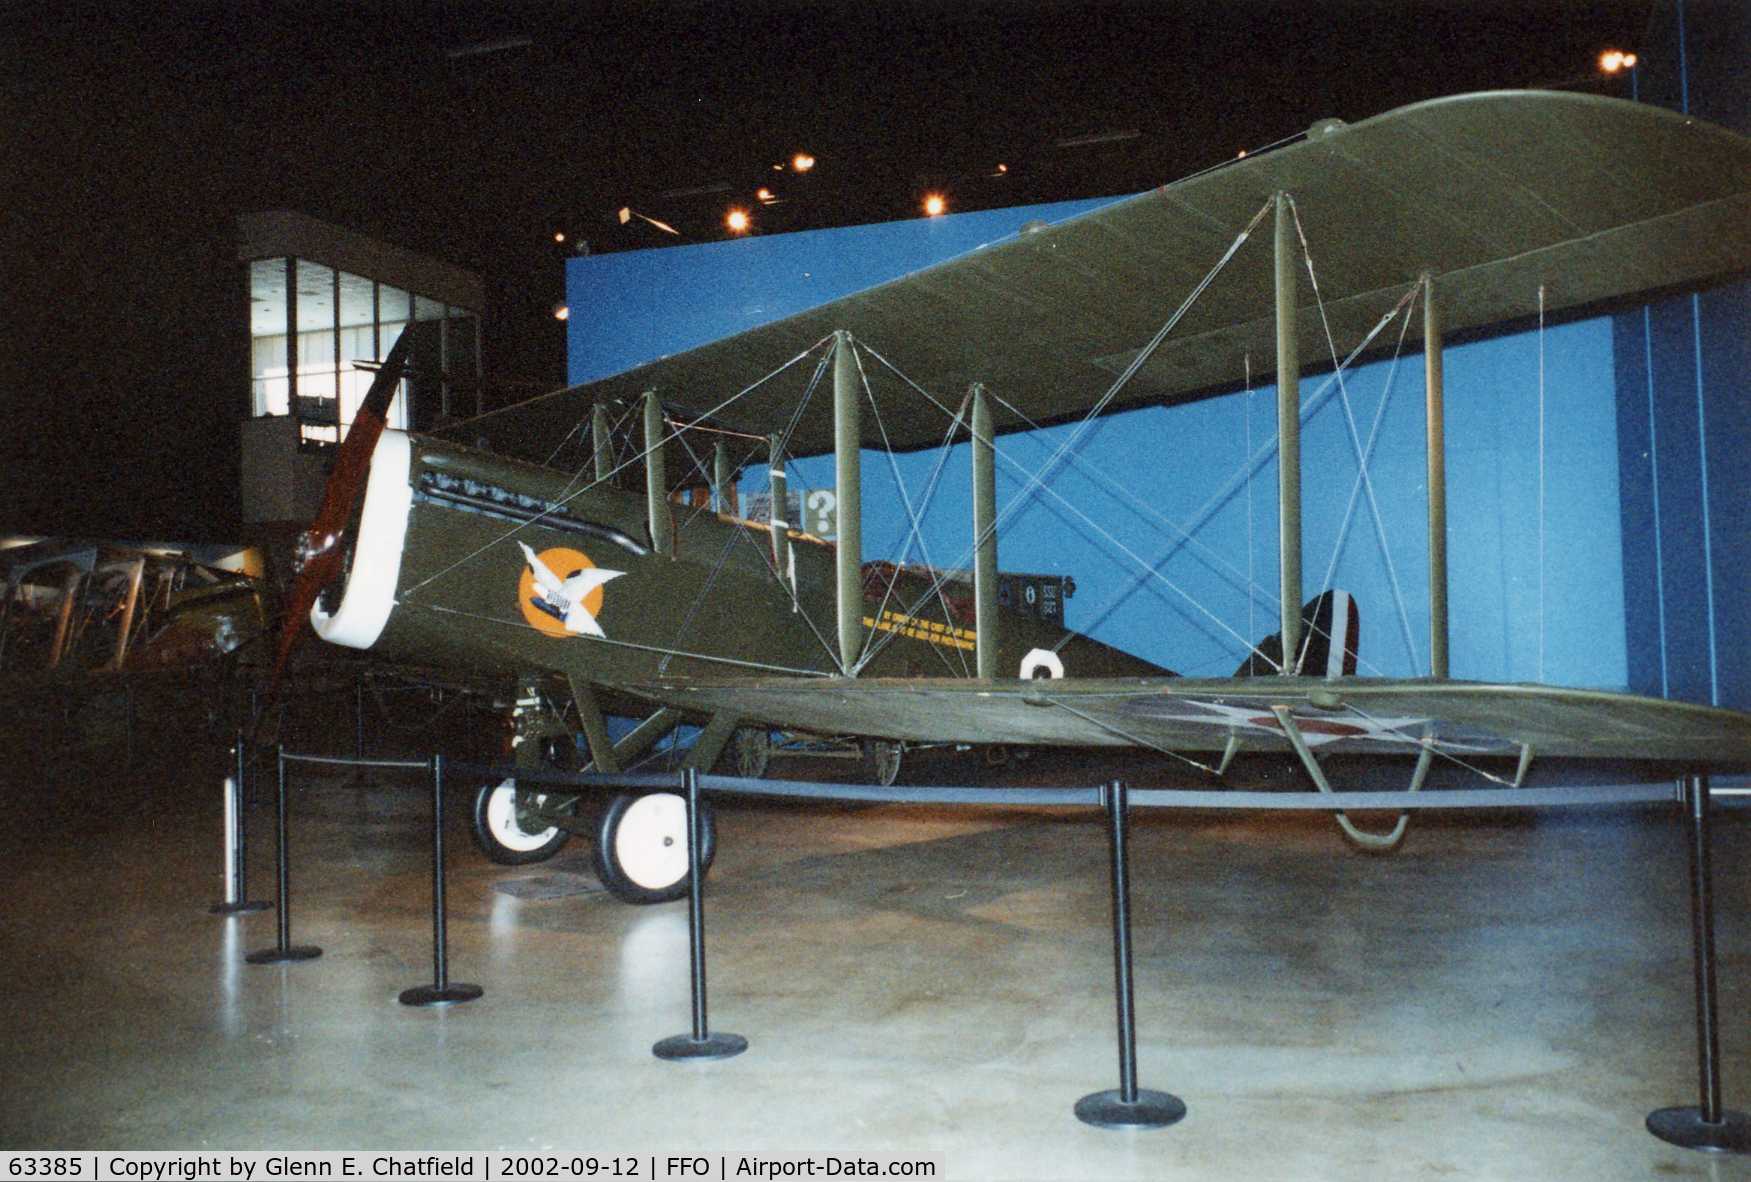 63385, Airco DH4B C/N Not found 63385, Replica DeHavilland DH-4B at the National Museum of the U.S. Air Force, marked as one used by 12th Aero Squadron in 1920 